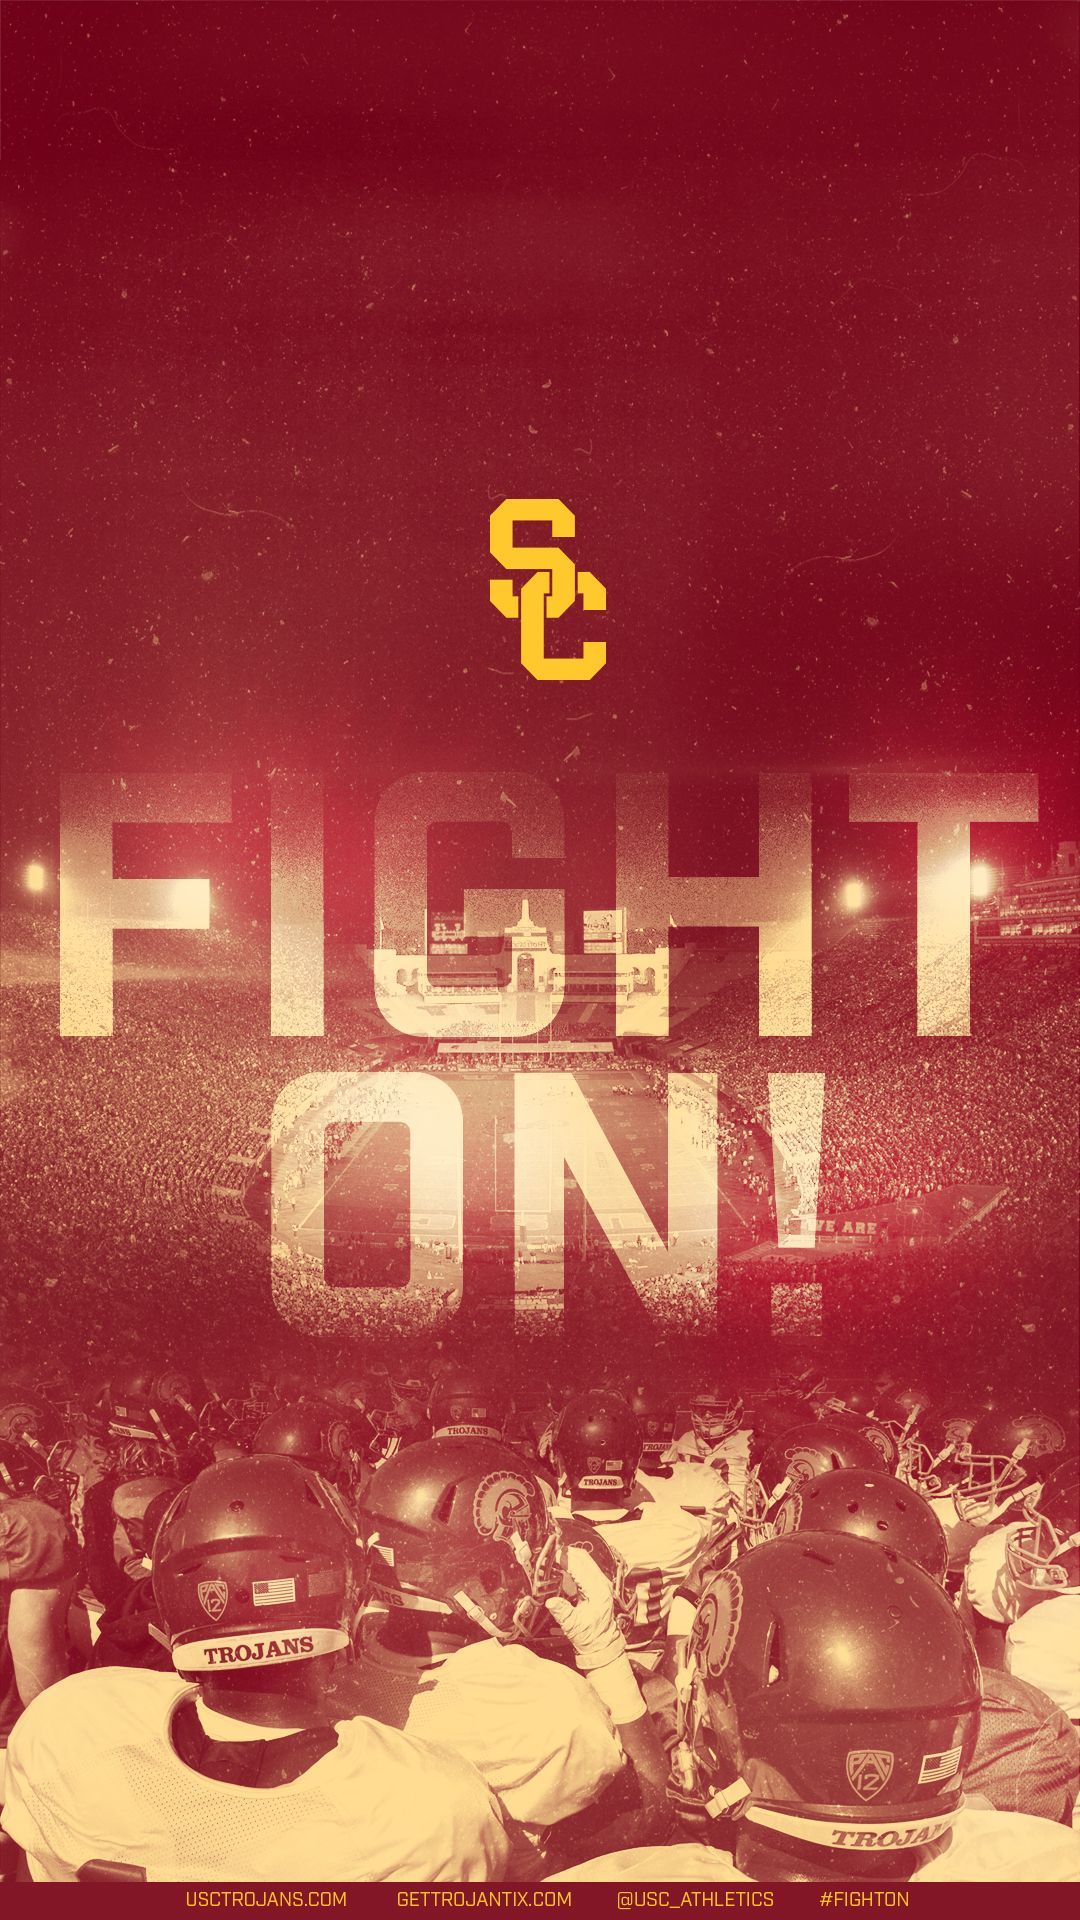 Usc Wallpapers